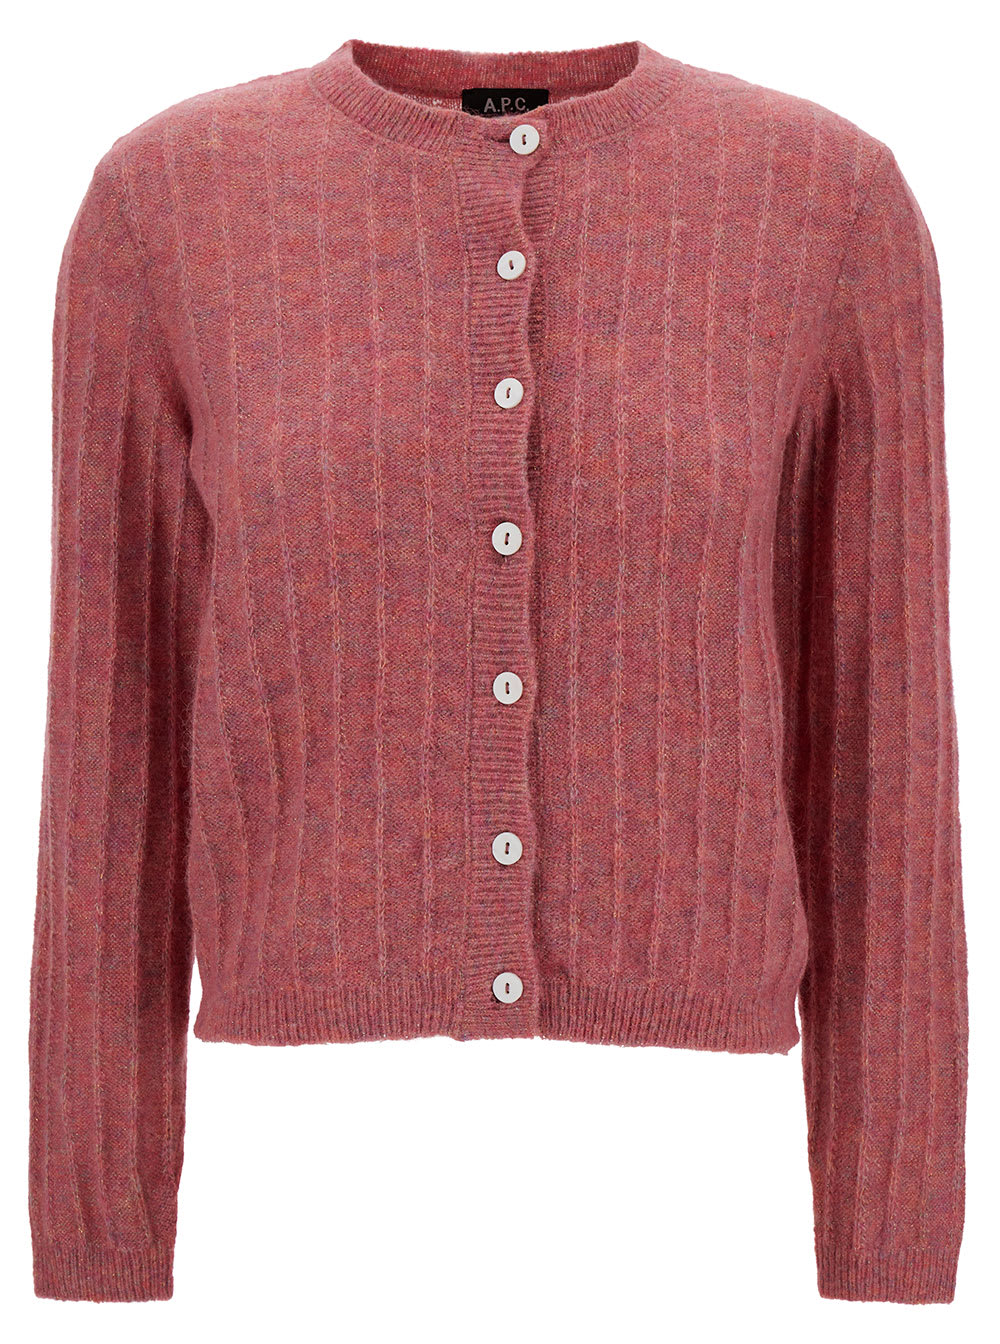 APC MILENA PINK CARDIGAN WITH MOTHER-OF-PEARLS BUTTONS IN ALPACA AND WOOL WOMAN